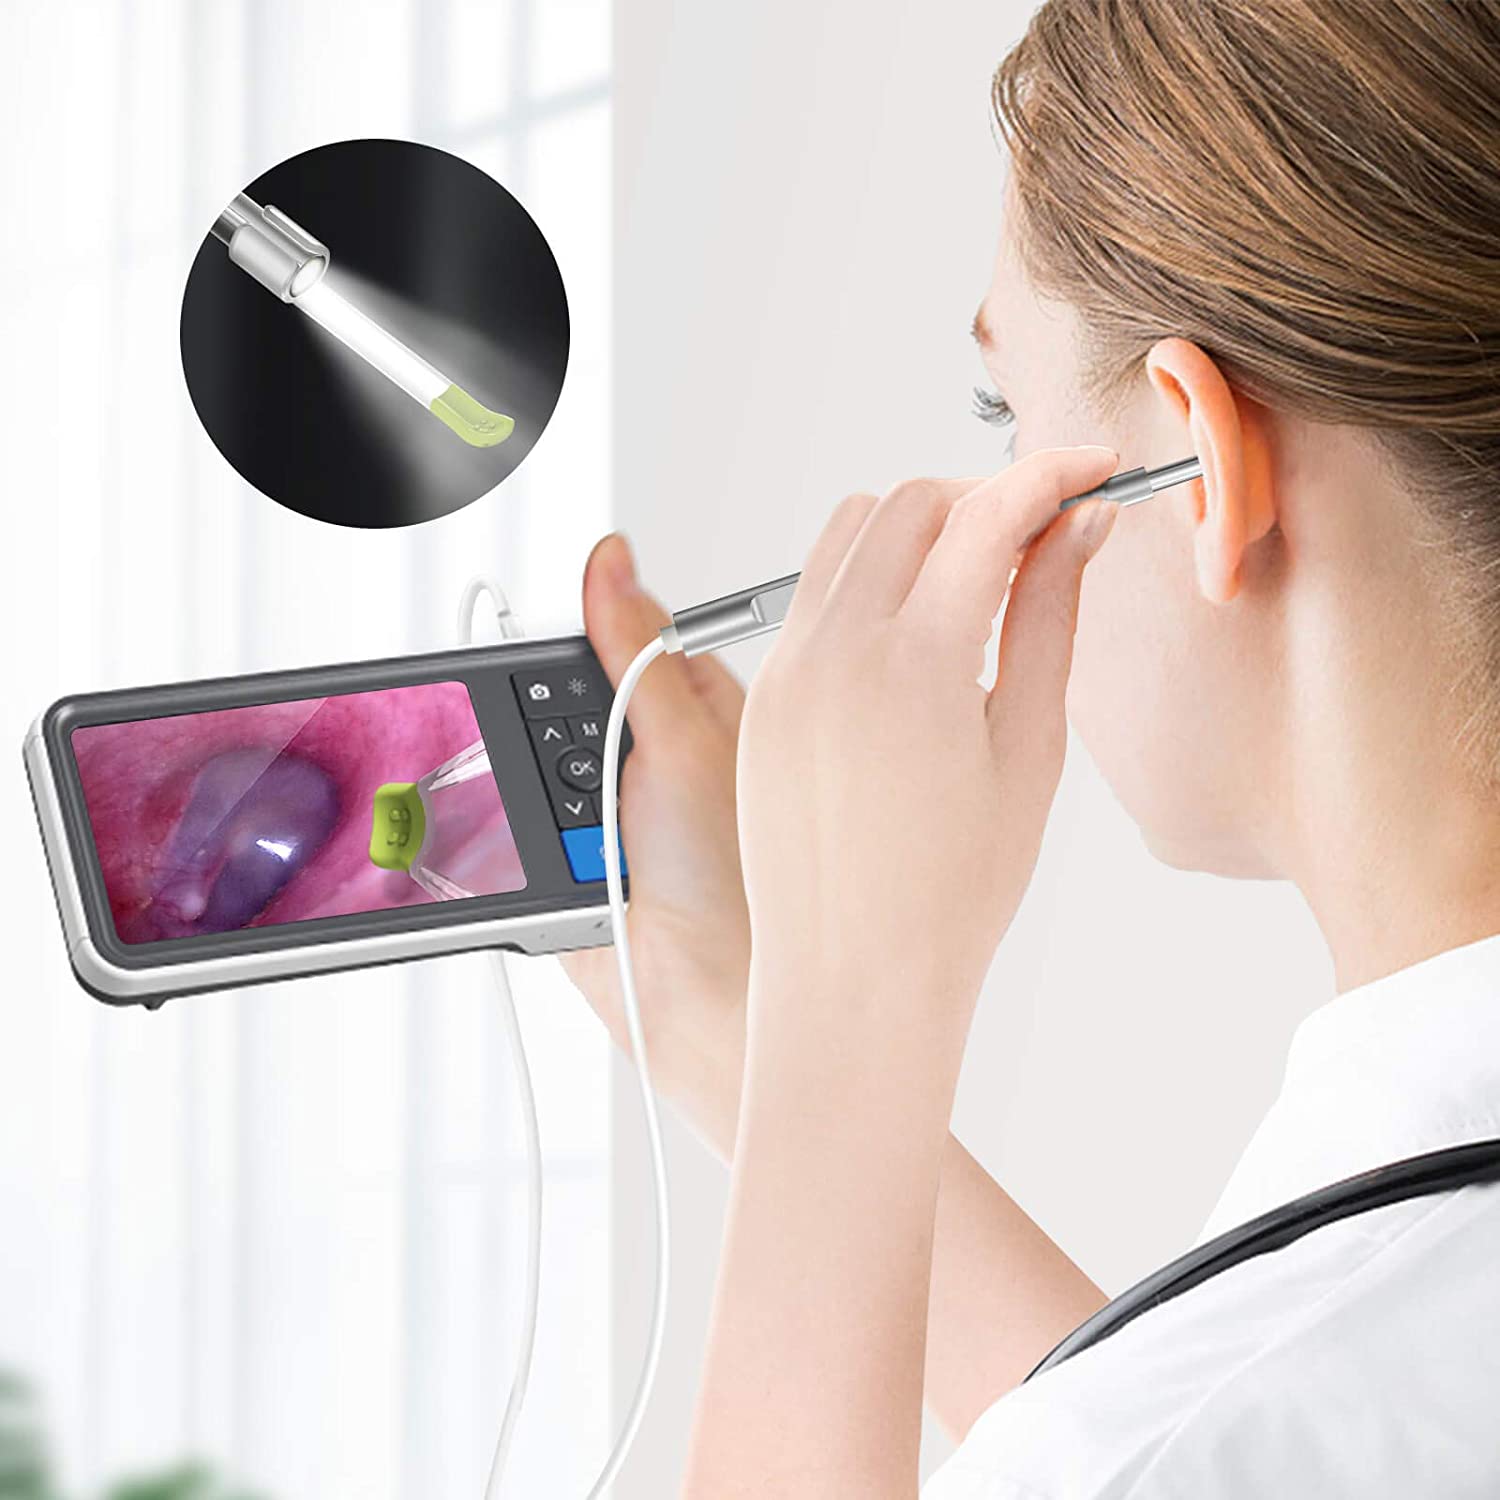 Digital Otoscope with 4.5 Inches Screen, Anykit 3.9mm Ear Camera with 6 LED Lights, 32GB Card, Ear Wax Removal Tool, Specula and 2500 mAh Rechargeable Battery, Supports Photo Snap and Video Recording